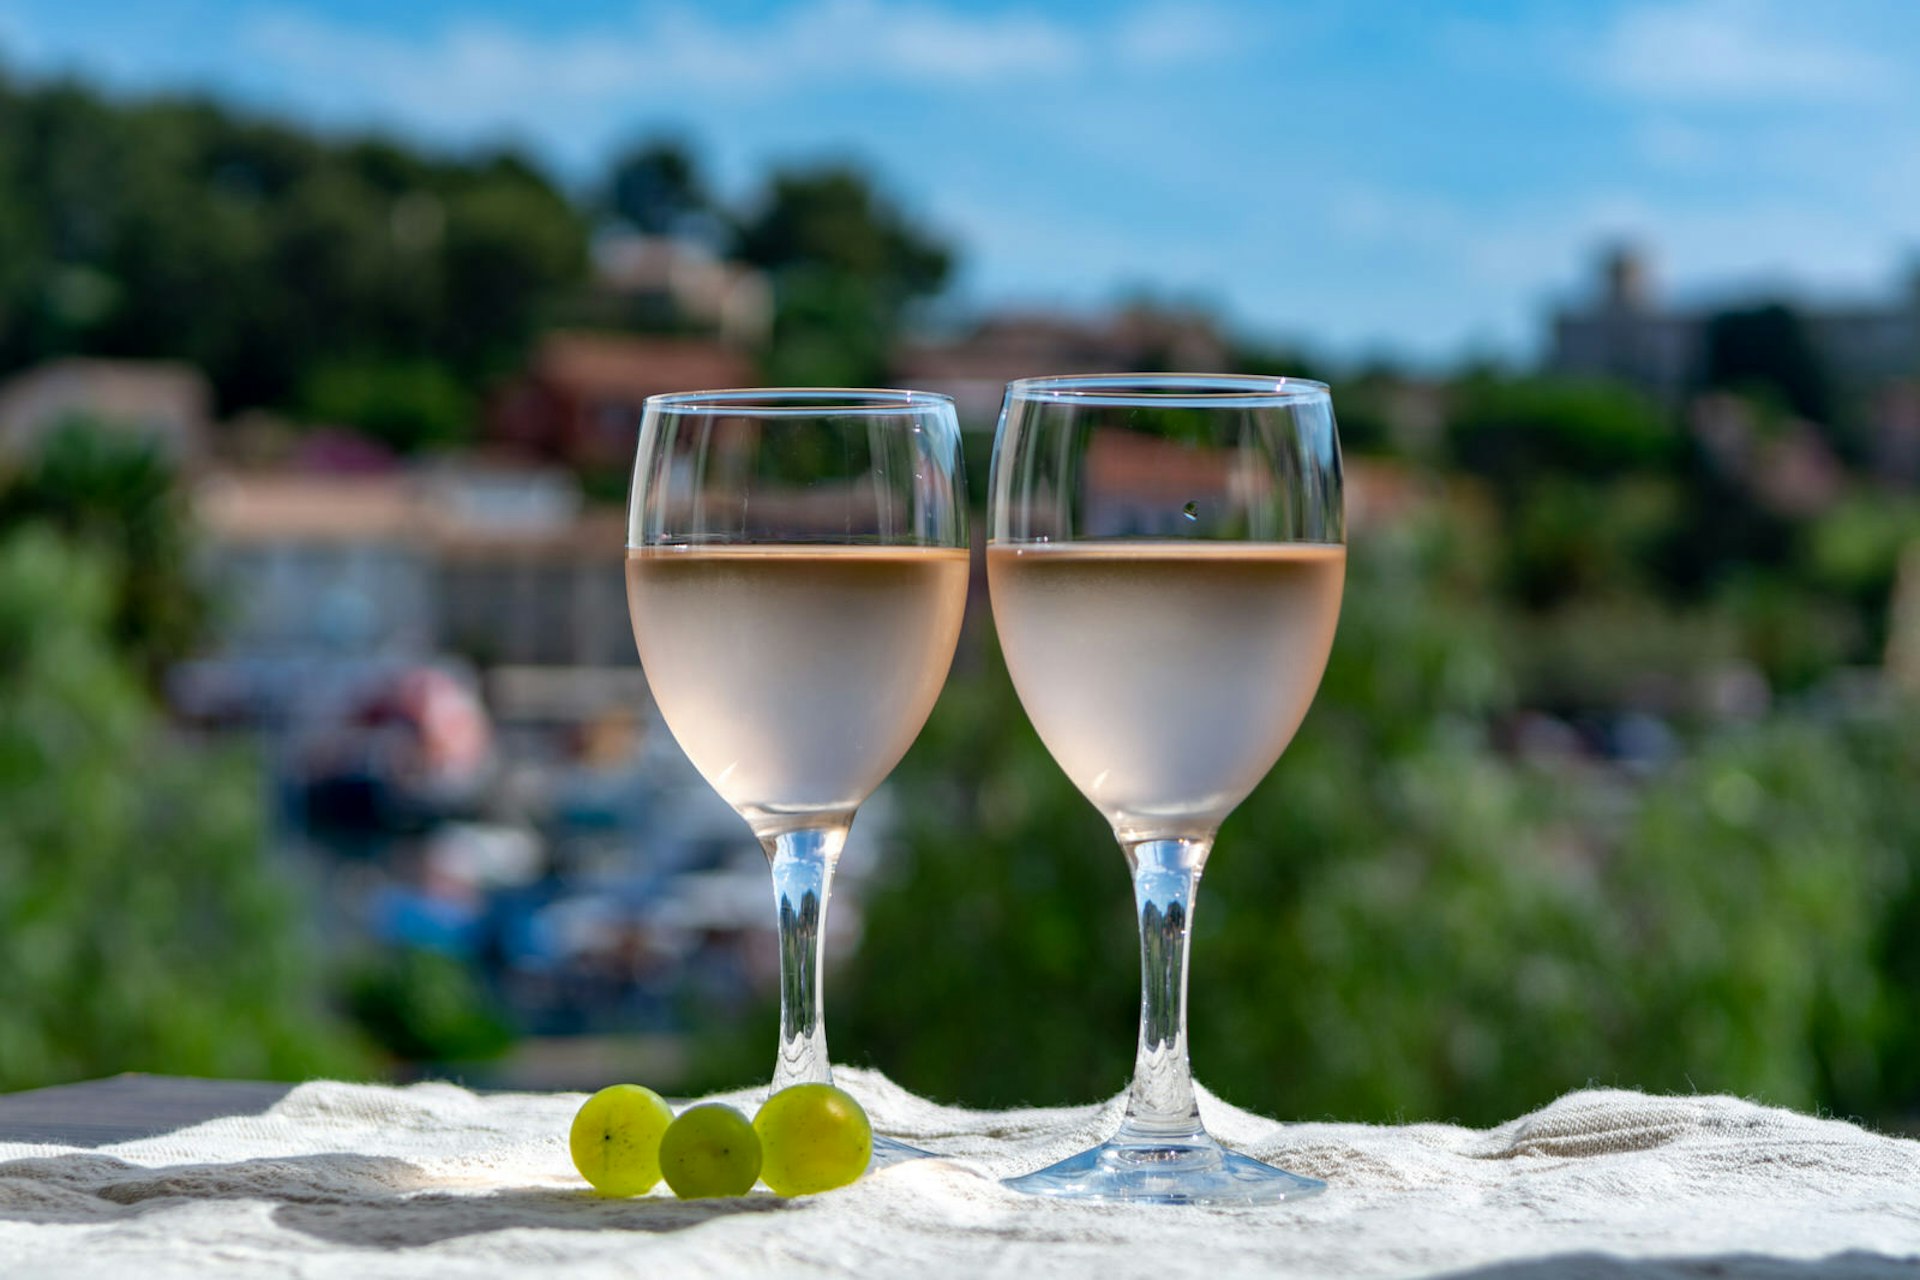 Two glasses of rose wine in Provence, France